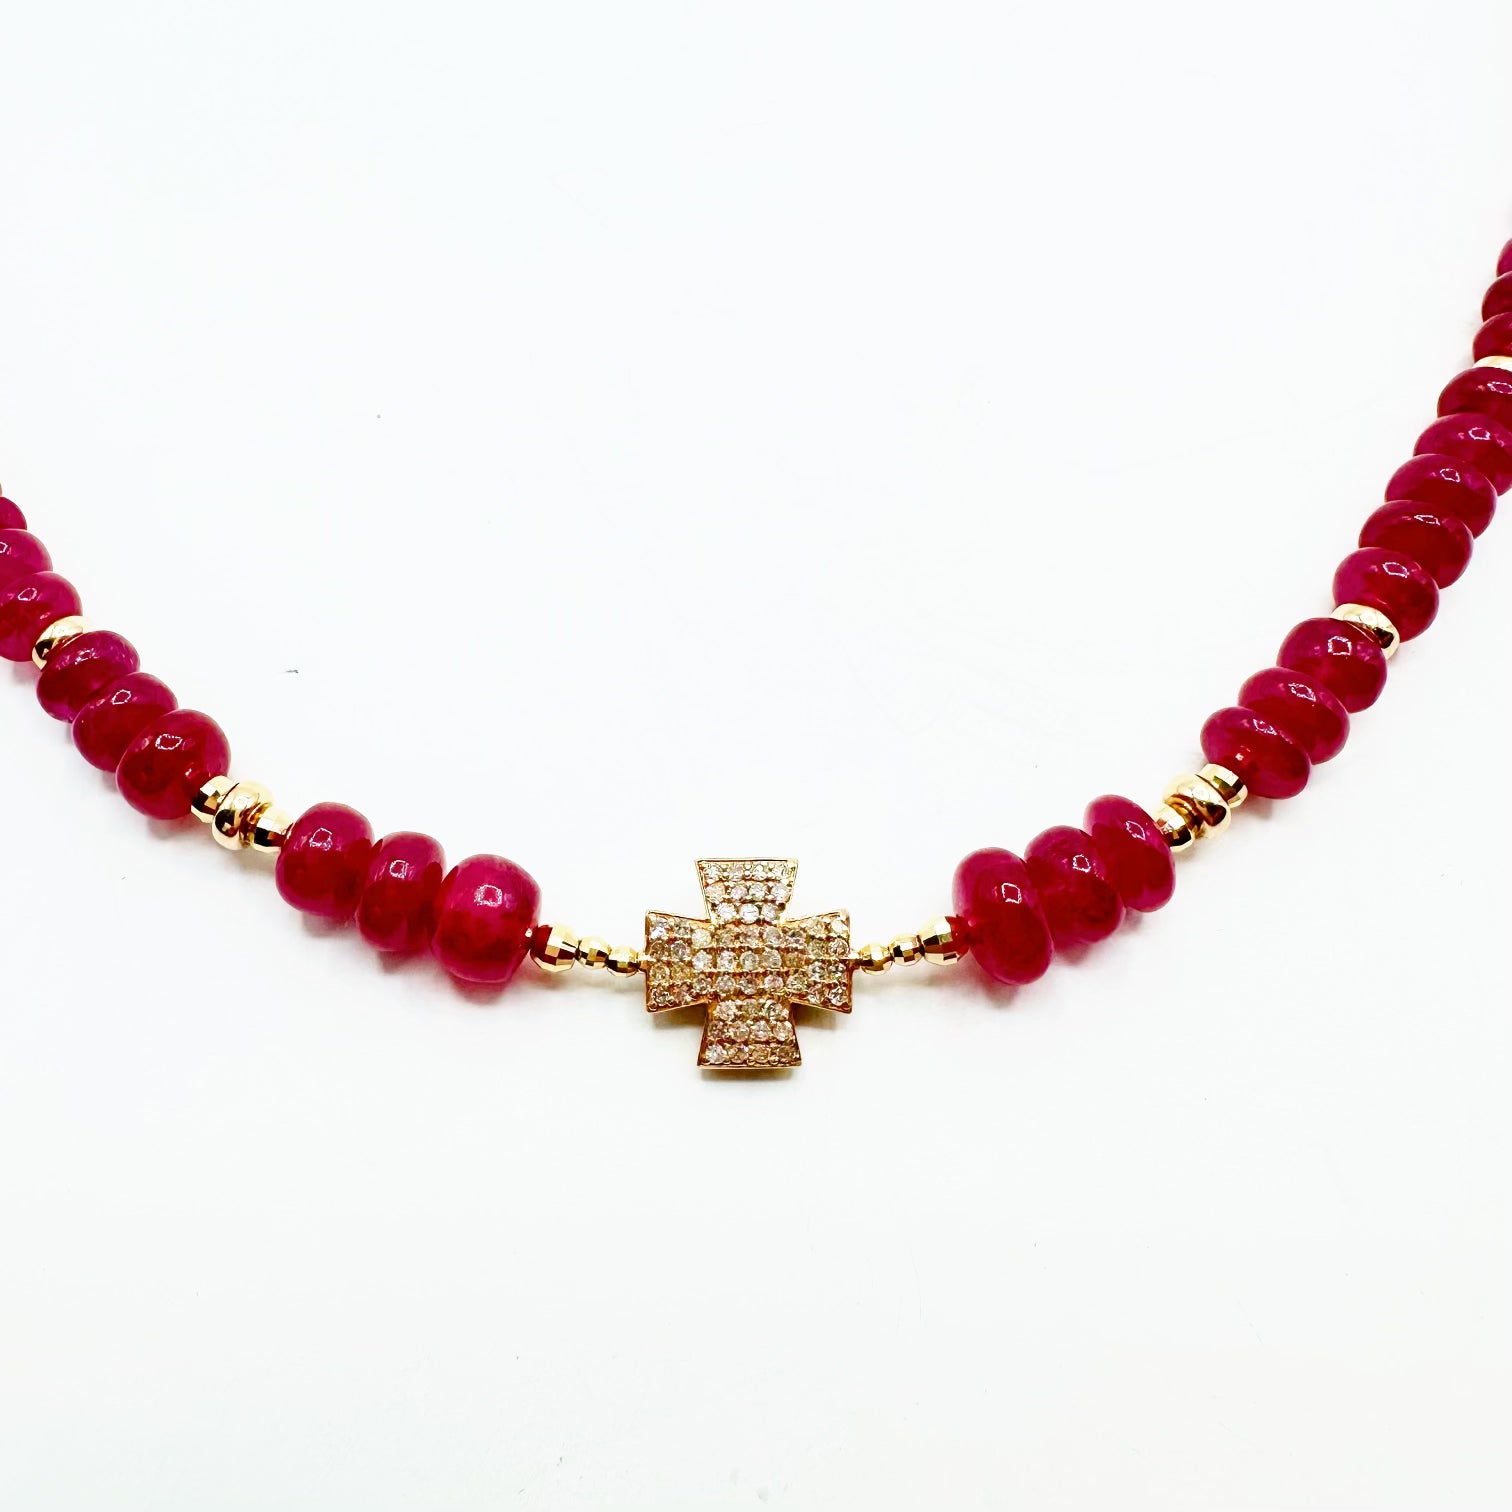 14K GOLD & RUBY NECKLACES. PLAIN STRAND WITH GOLD BEADS OR DIAMON CROSS STYLE